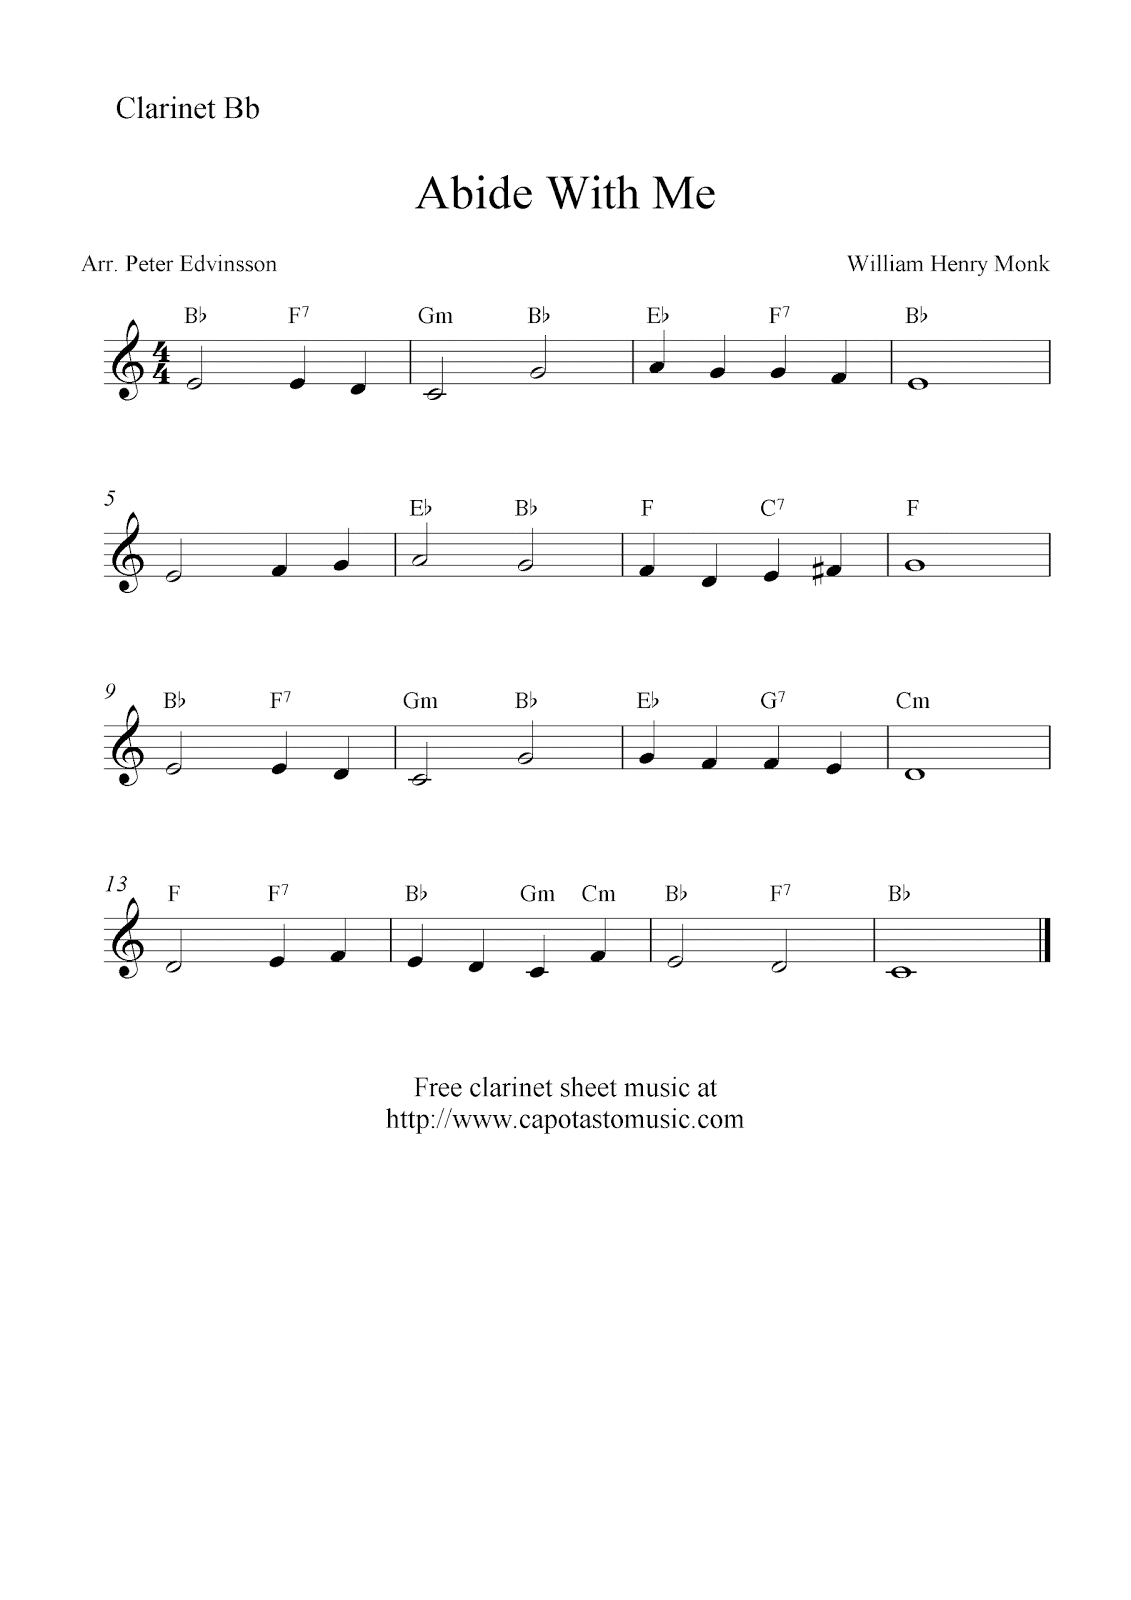 Abide With Me, Free Easy Clarinet Sheet Music - Free Printable Clarinet Sheet Music